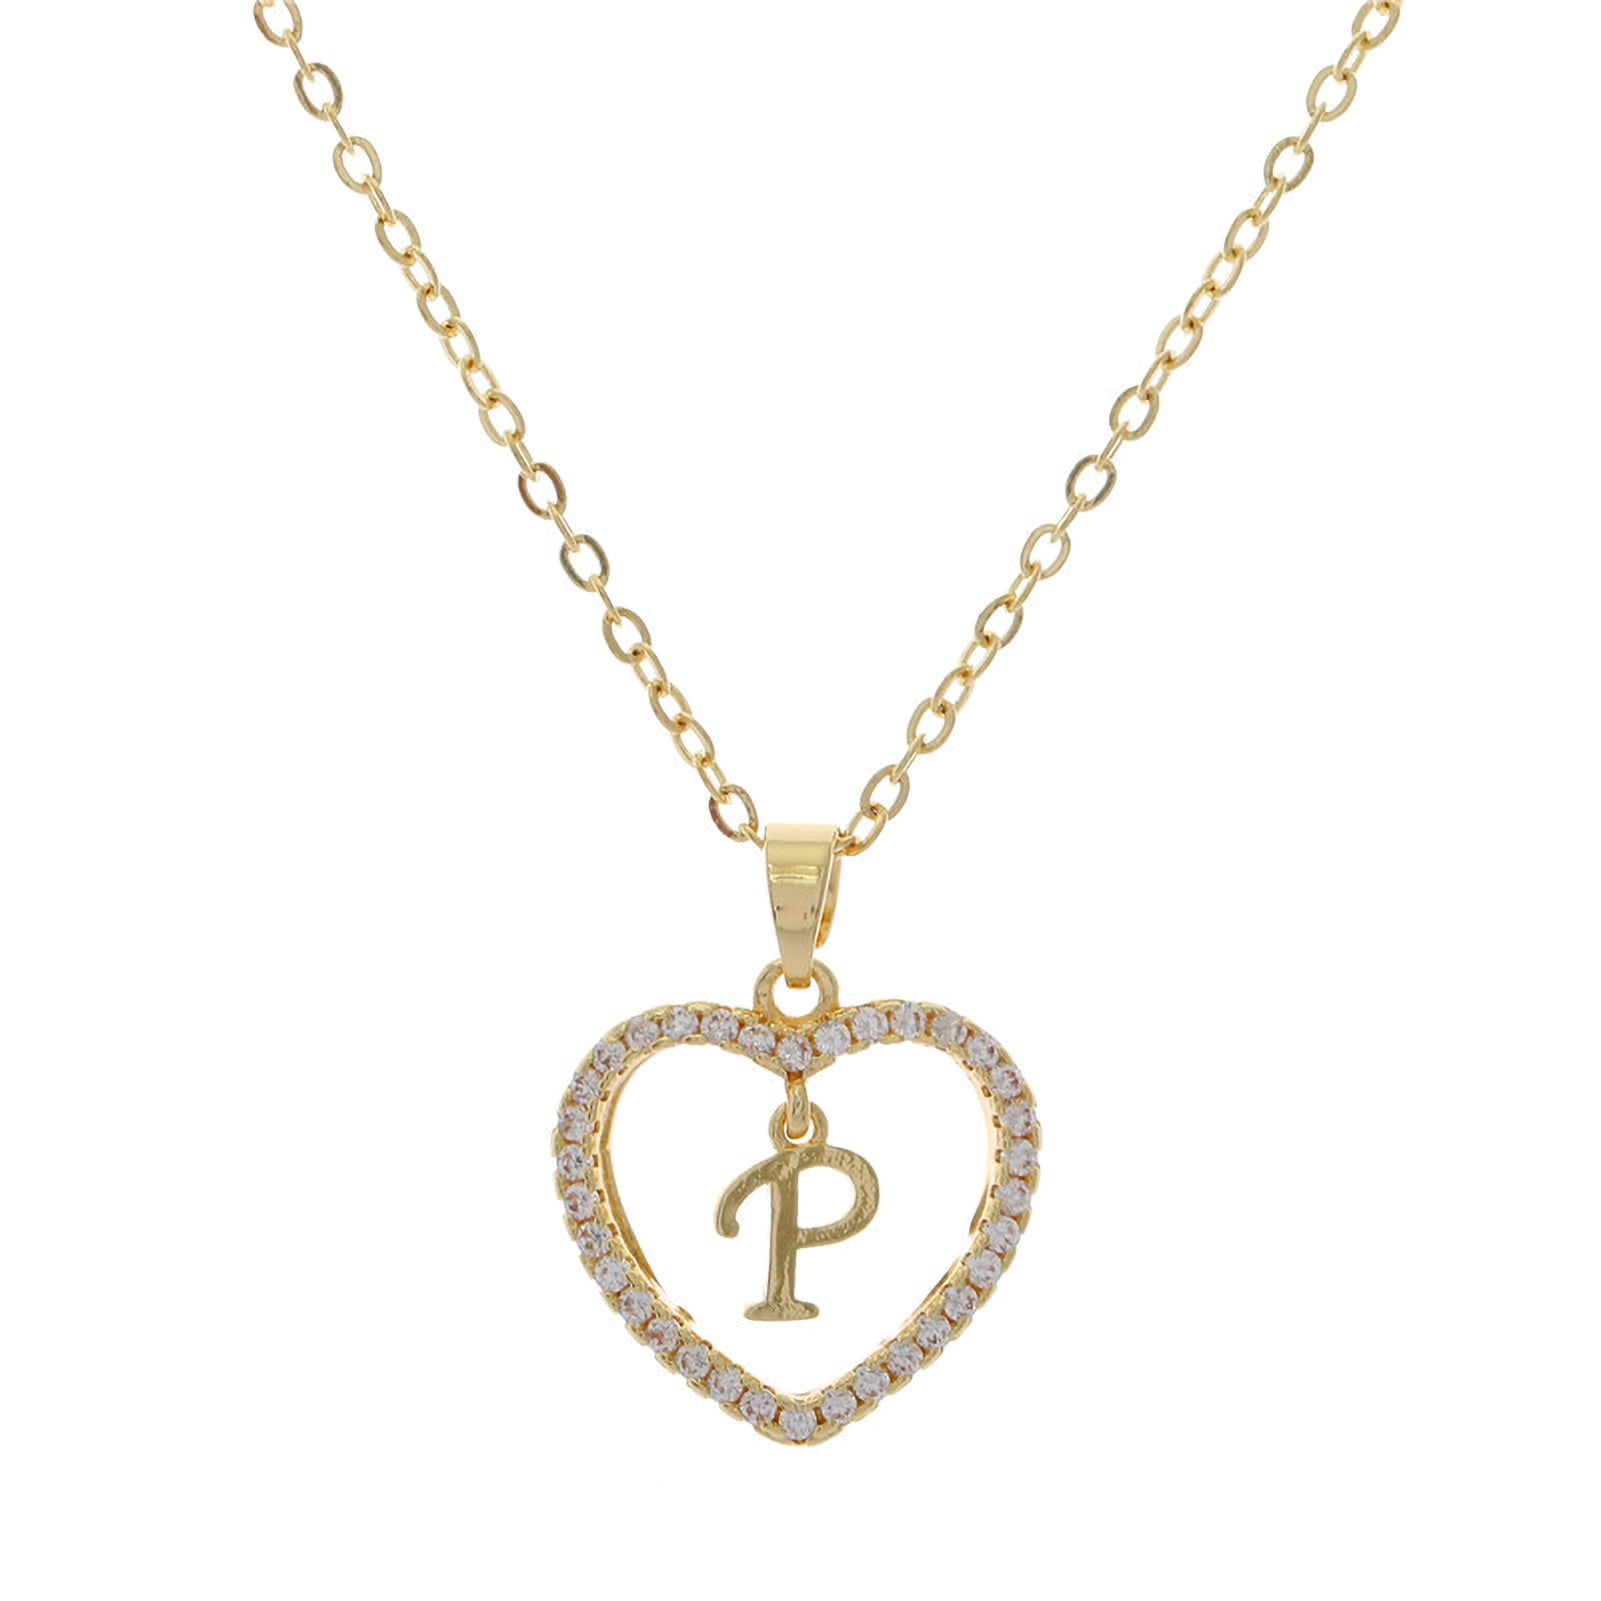 Details about   14K Gold & Sterling Silver Crystals Letter Initial Name Charm Pendant Necklace 